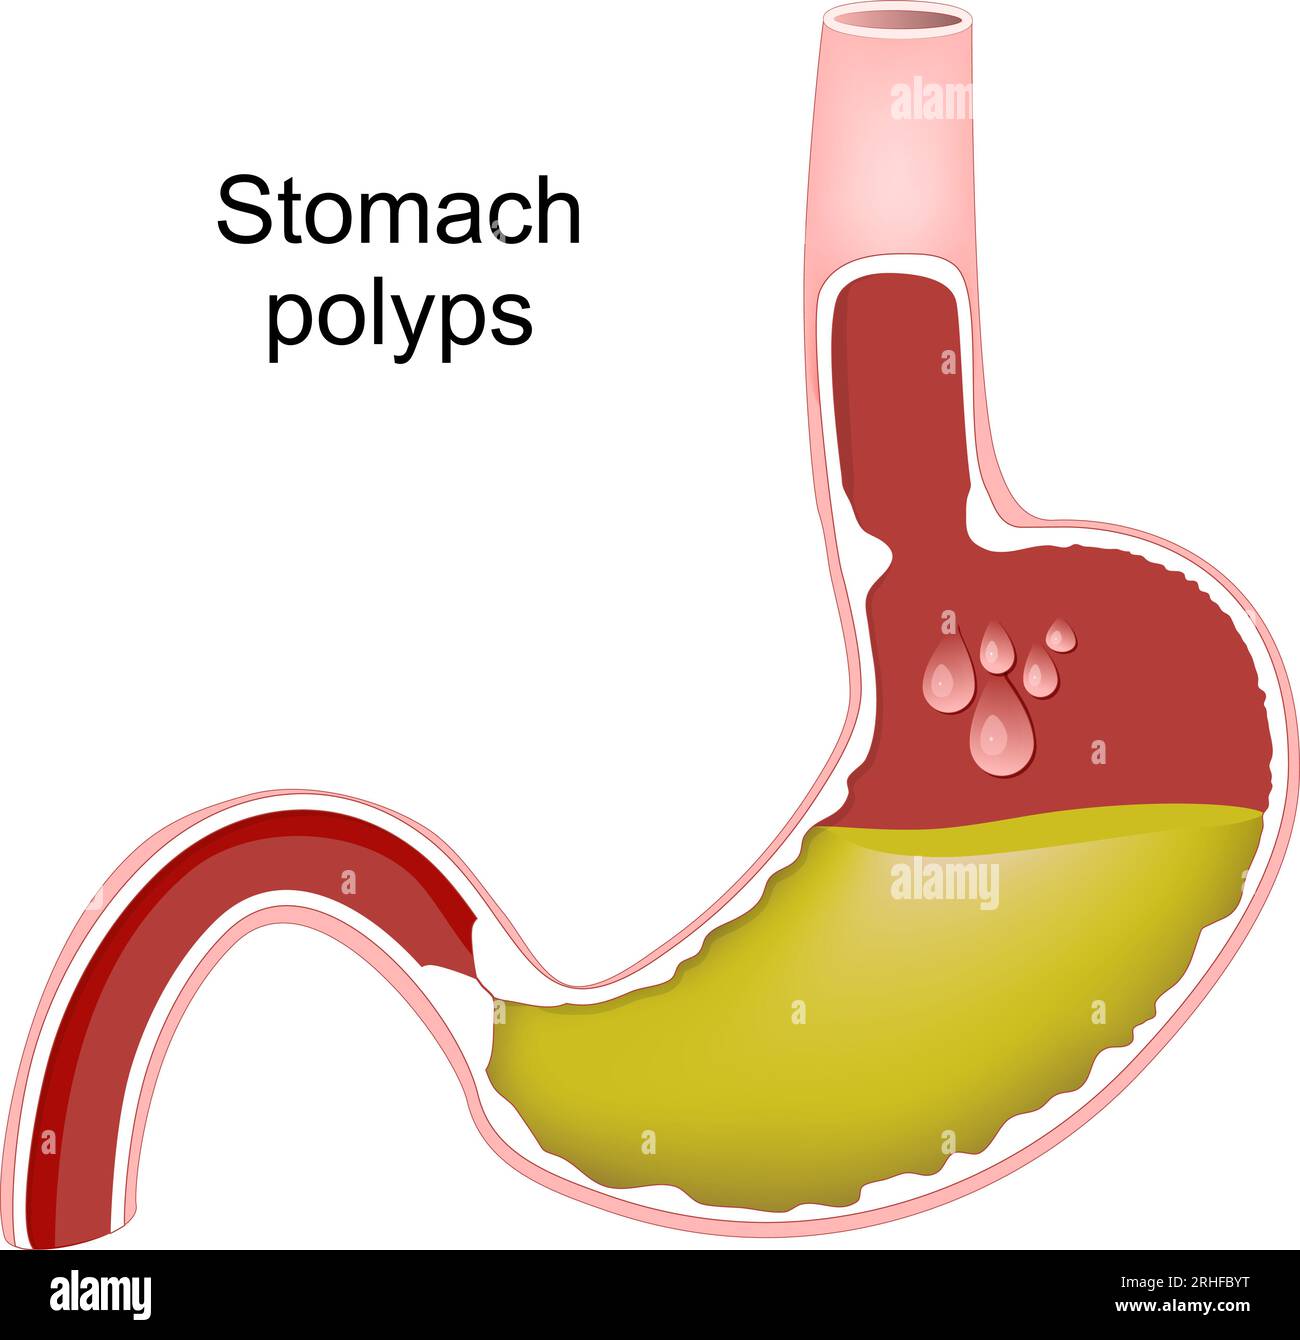 Stomach polyps. Cross section of human stomach with Gastric polyps. Hyperplasia of Gastric lining. bacterial infection caused of Helicobacter pylori. Stock Vector